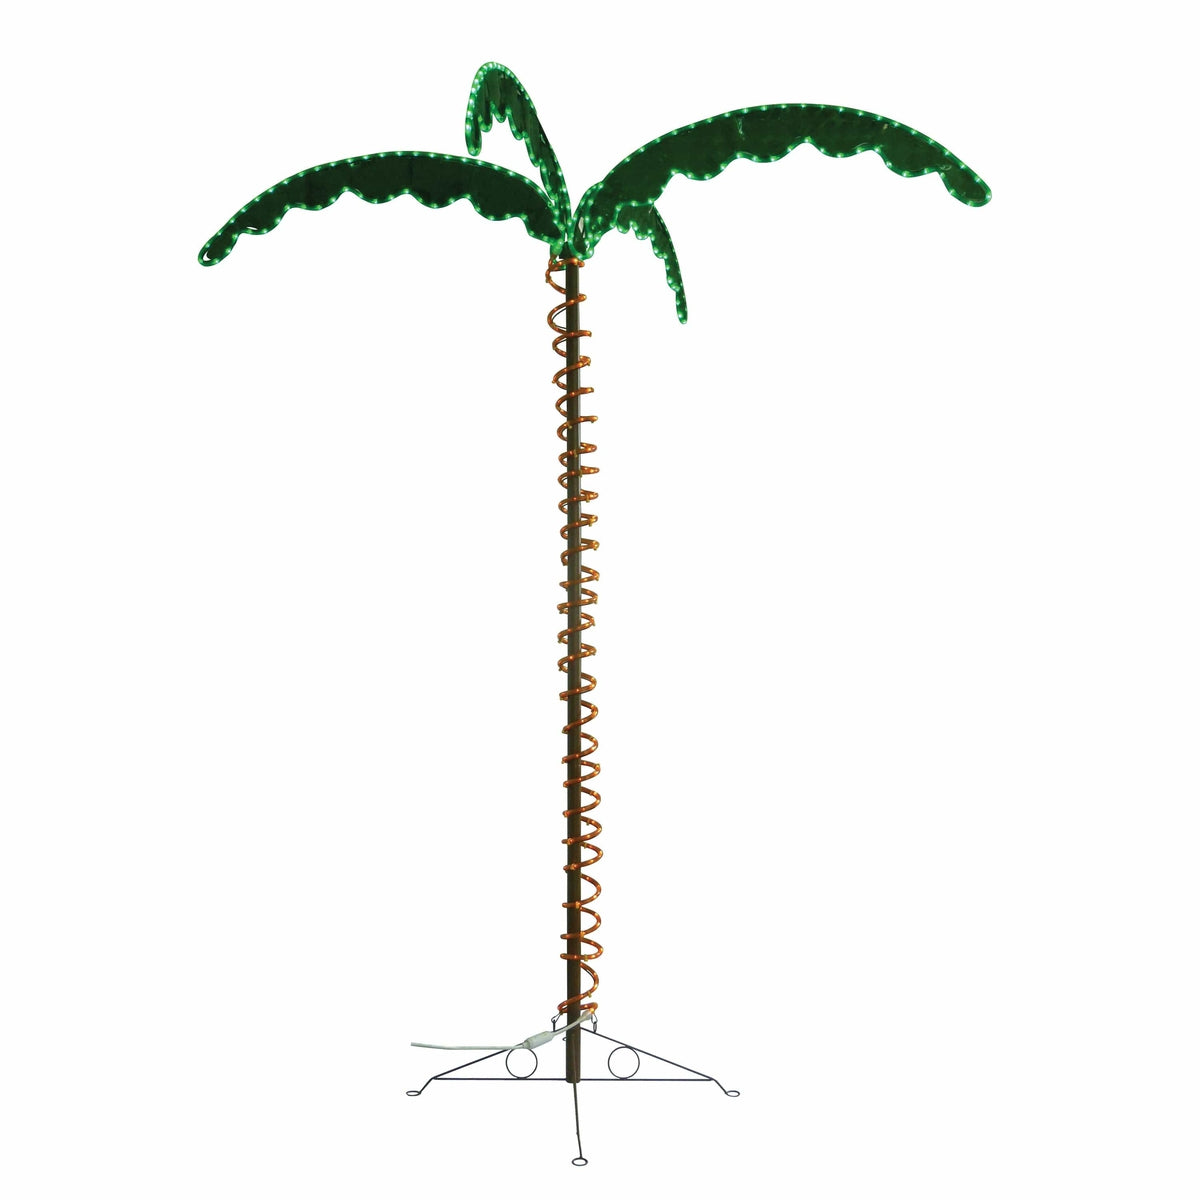 Ming's Mark Qualifies for Free Shipping Ming's Mark Green LongLife Decorative Palm Tree Rope Lights 7' #8080104